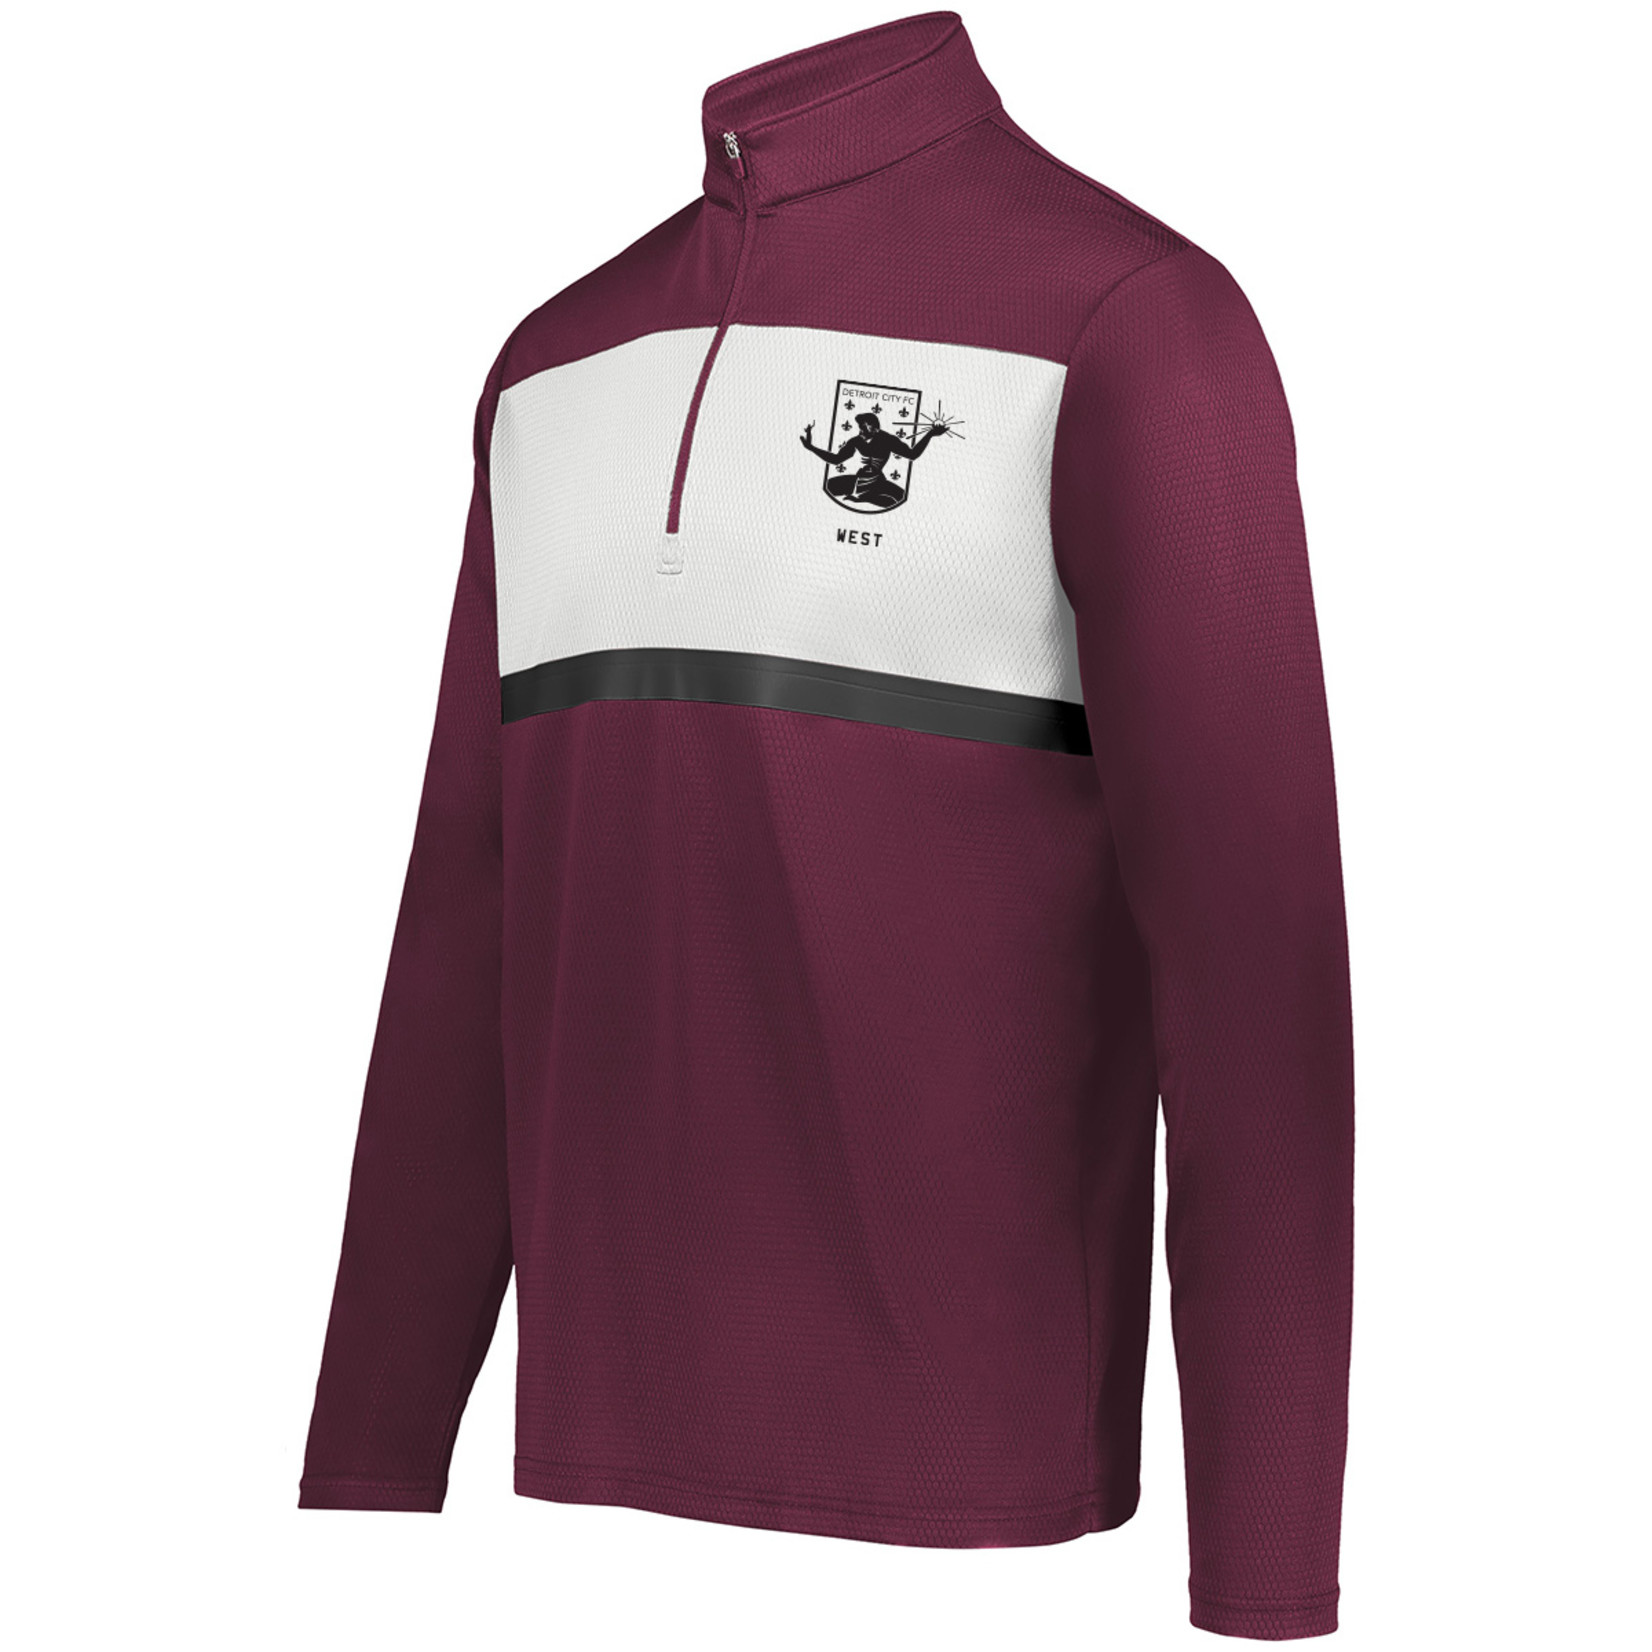 DCFC PRISM BOLD 1/4 ZIP PULLOVER (MAROON/WHITE)